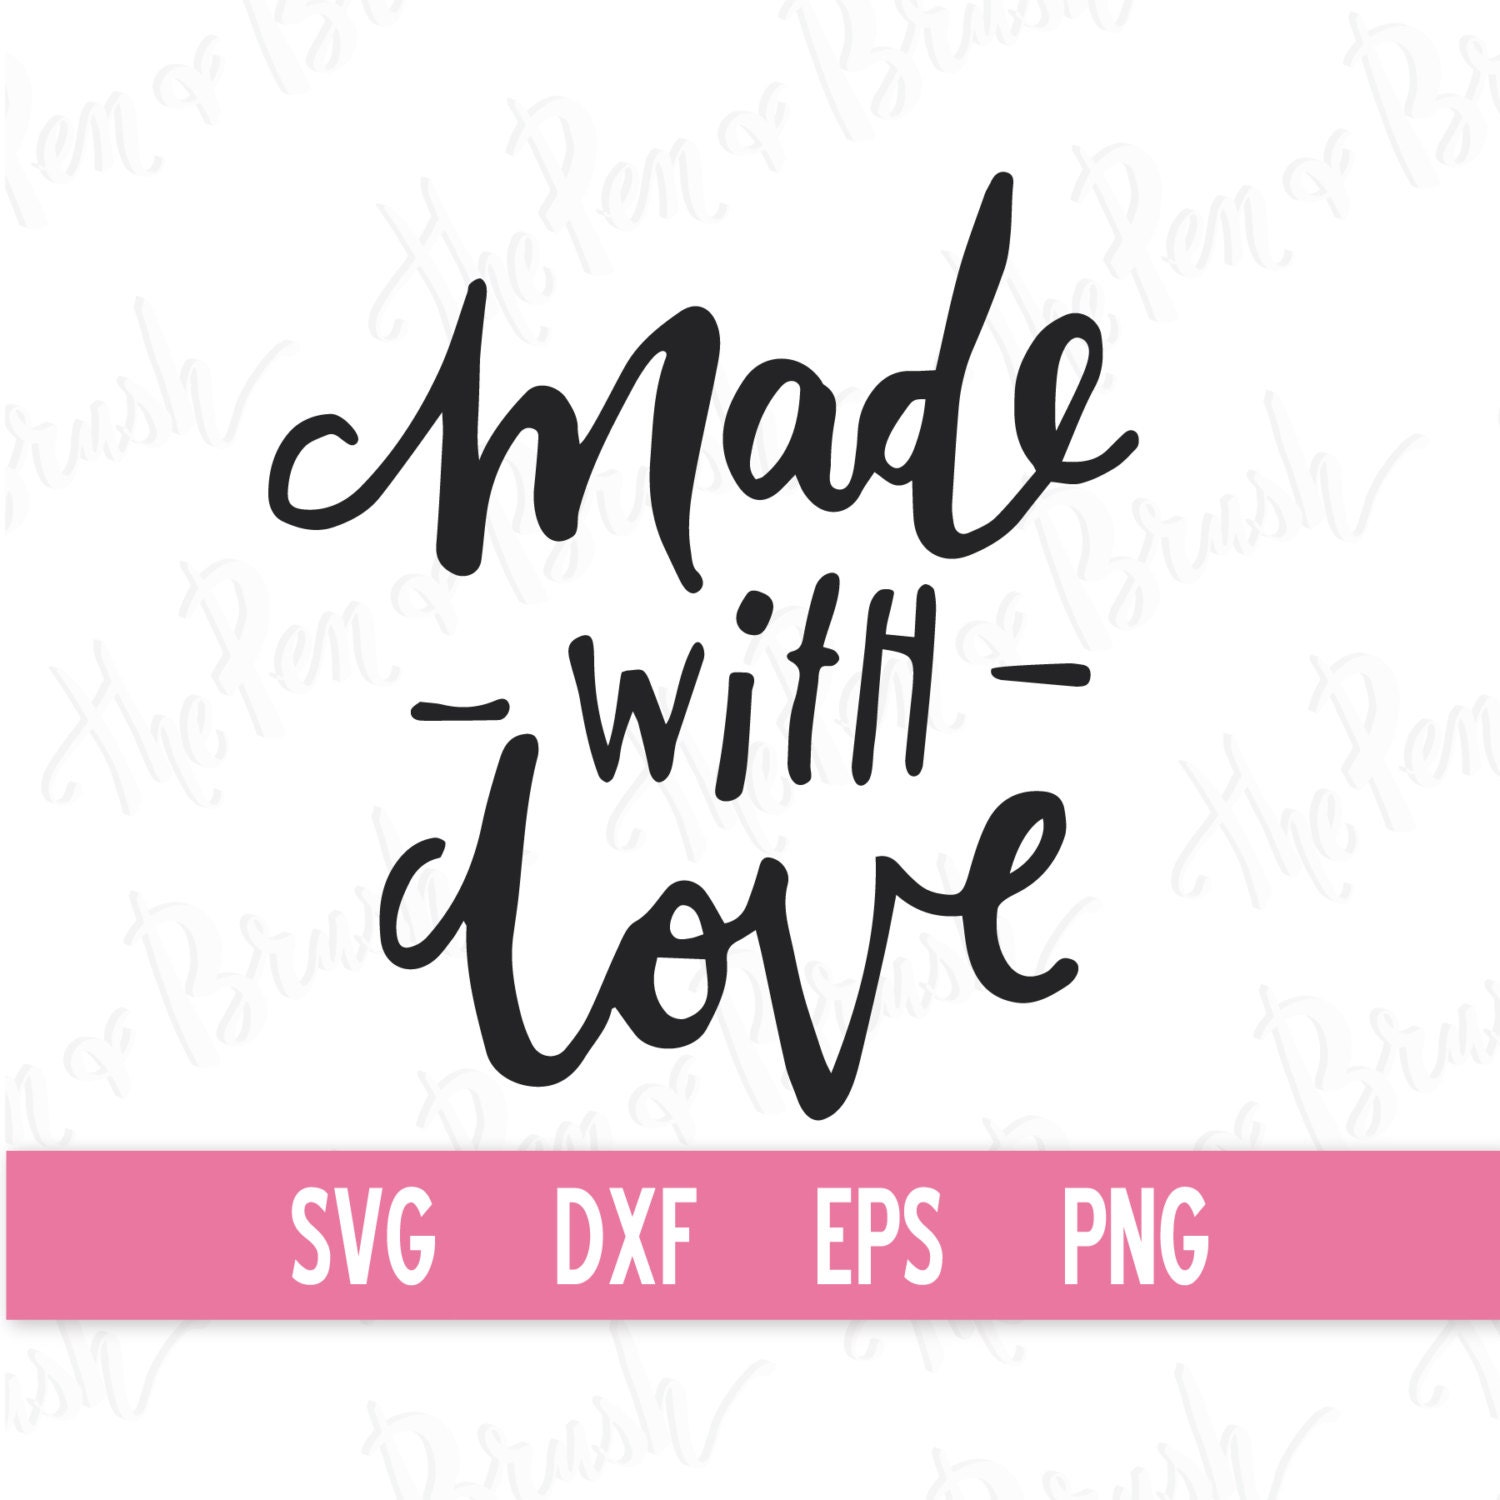 Download SVG: Made with Love Clip Art // Vector eps dxf // Transparent